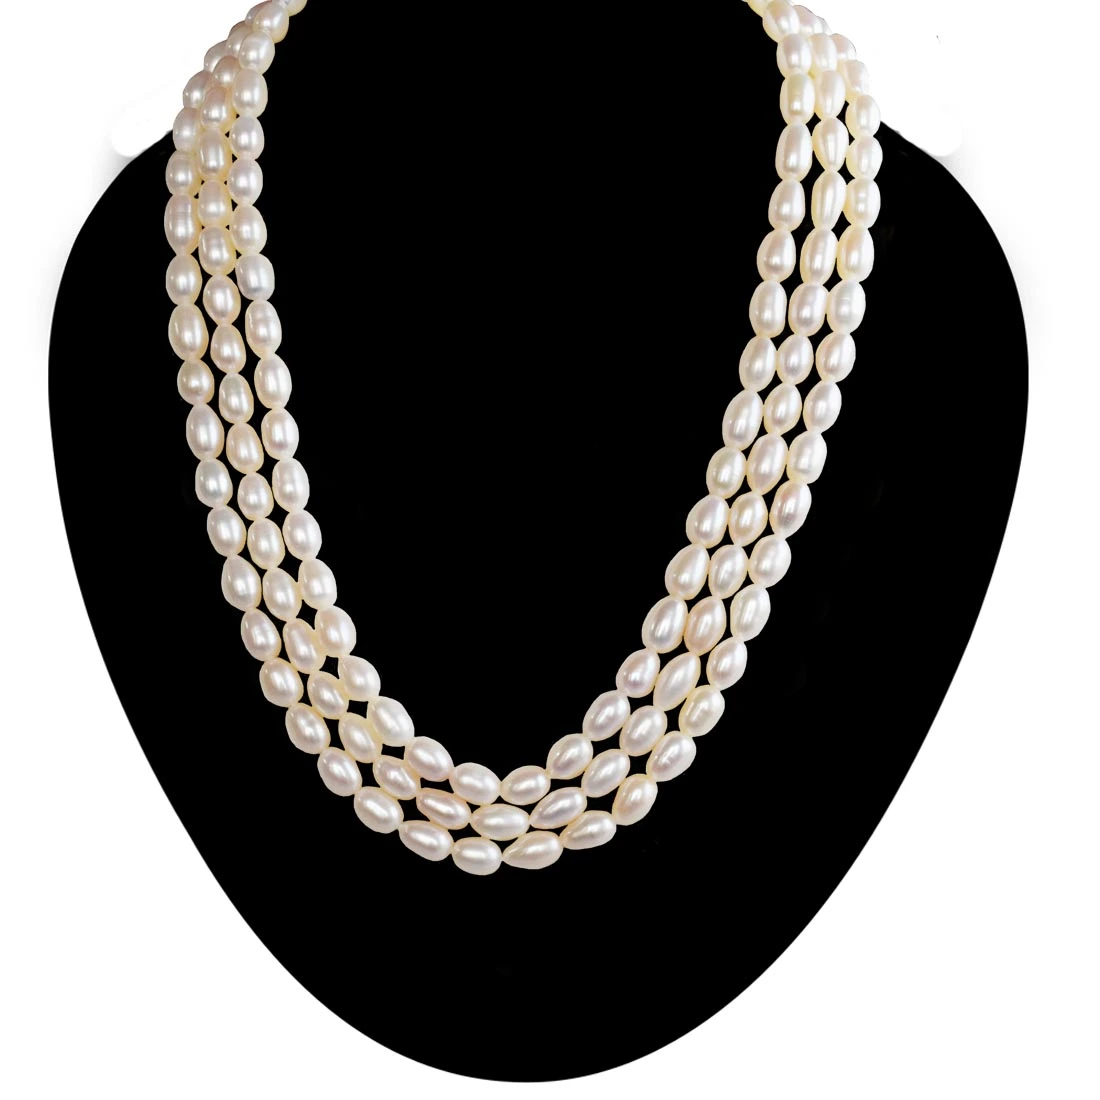 3 Line Real Big Elongated Pearl Necklace for Women (SN1009)